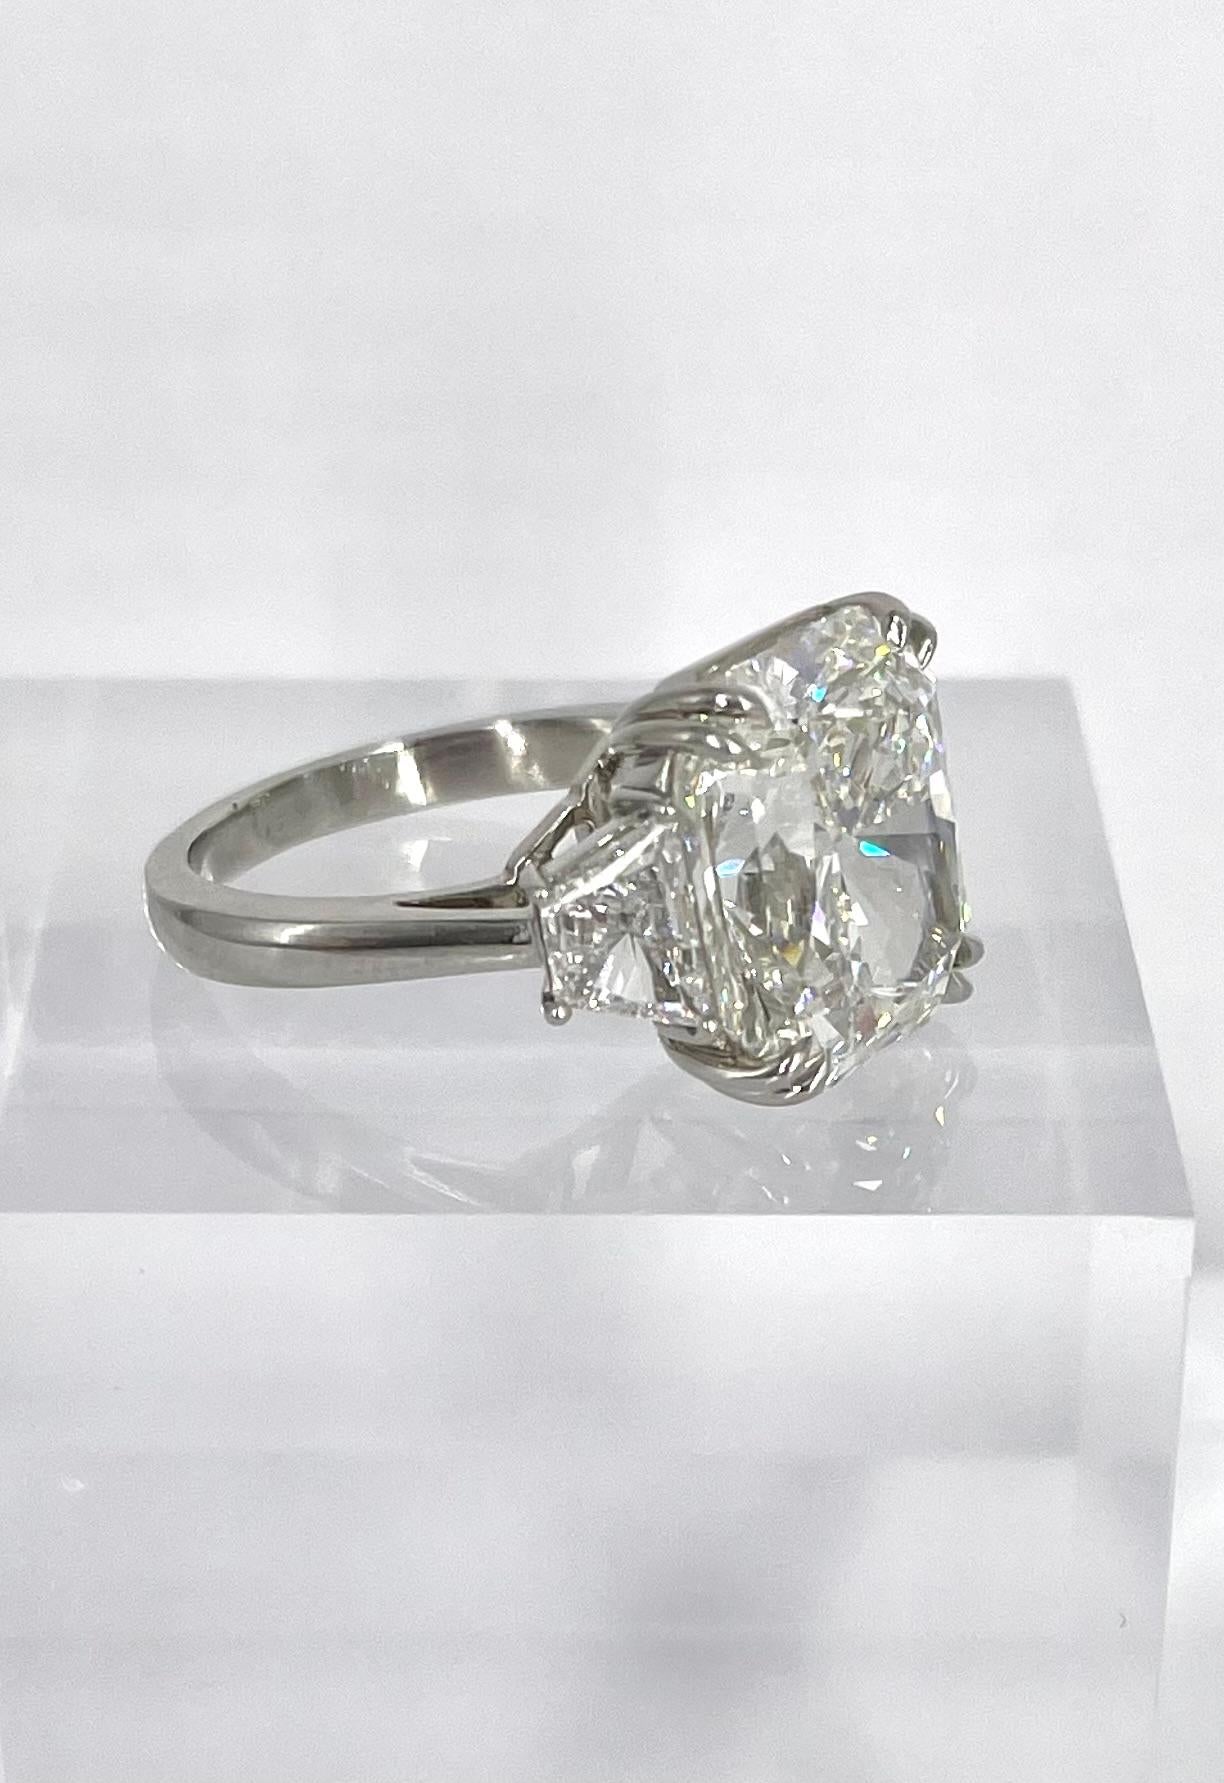 This gorgeous radiant cut engagement ring is a timeless piece that exudes elegance and glamour. Featuring a 10.05 carat radiant certified by GIA to be G color and VS1 clarity, this diamond is exceptionally sparkly and brilliant. The center diamond